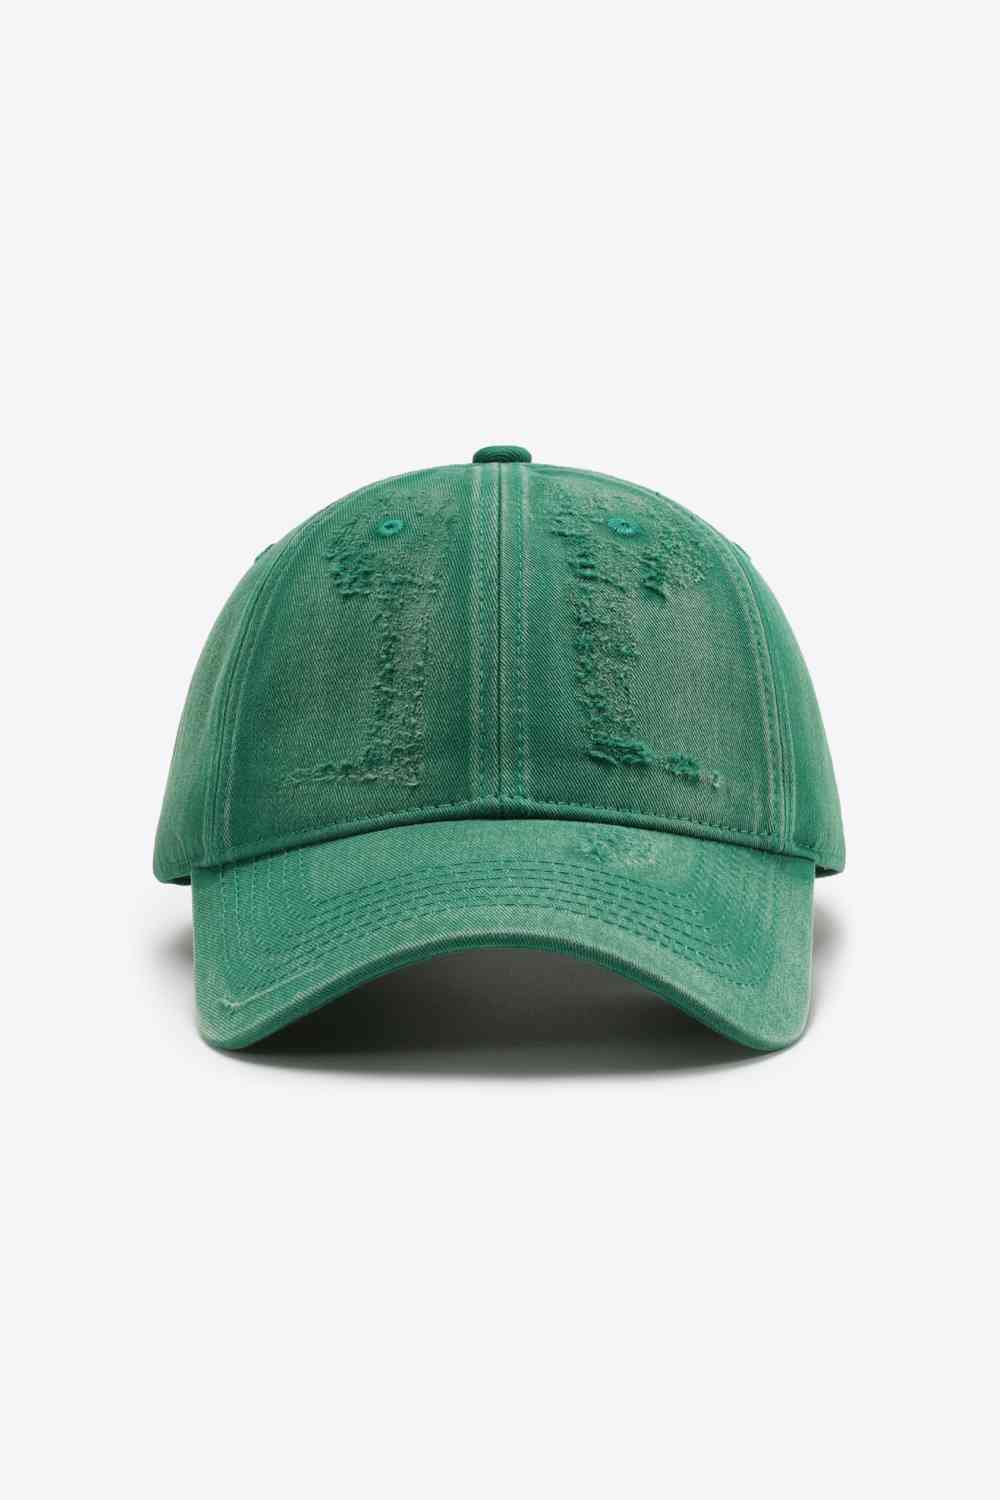 Distressed Adjustable Baseball Cap Green One Size